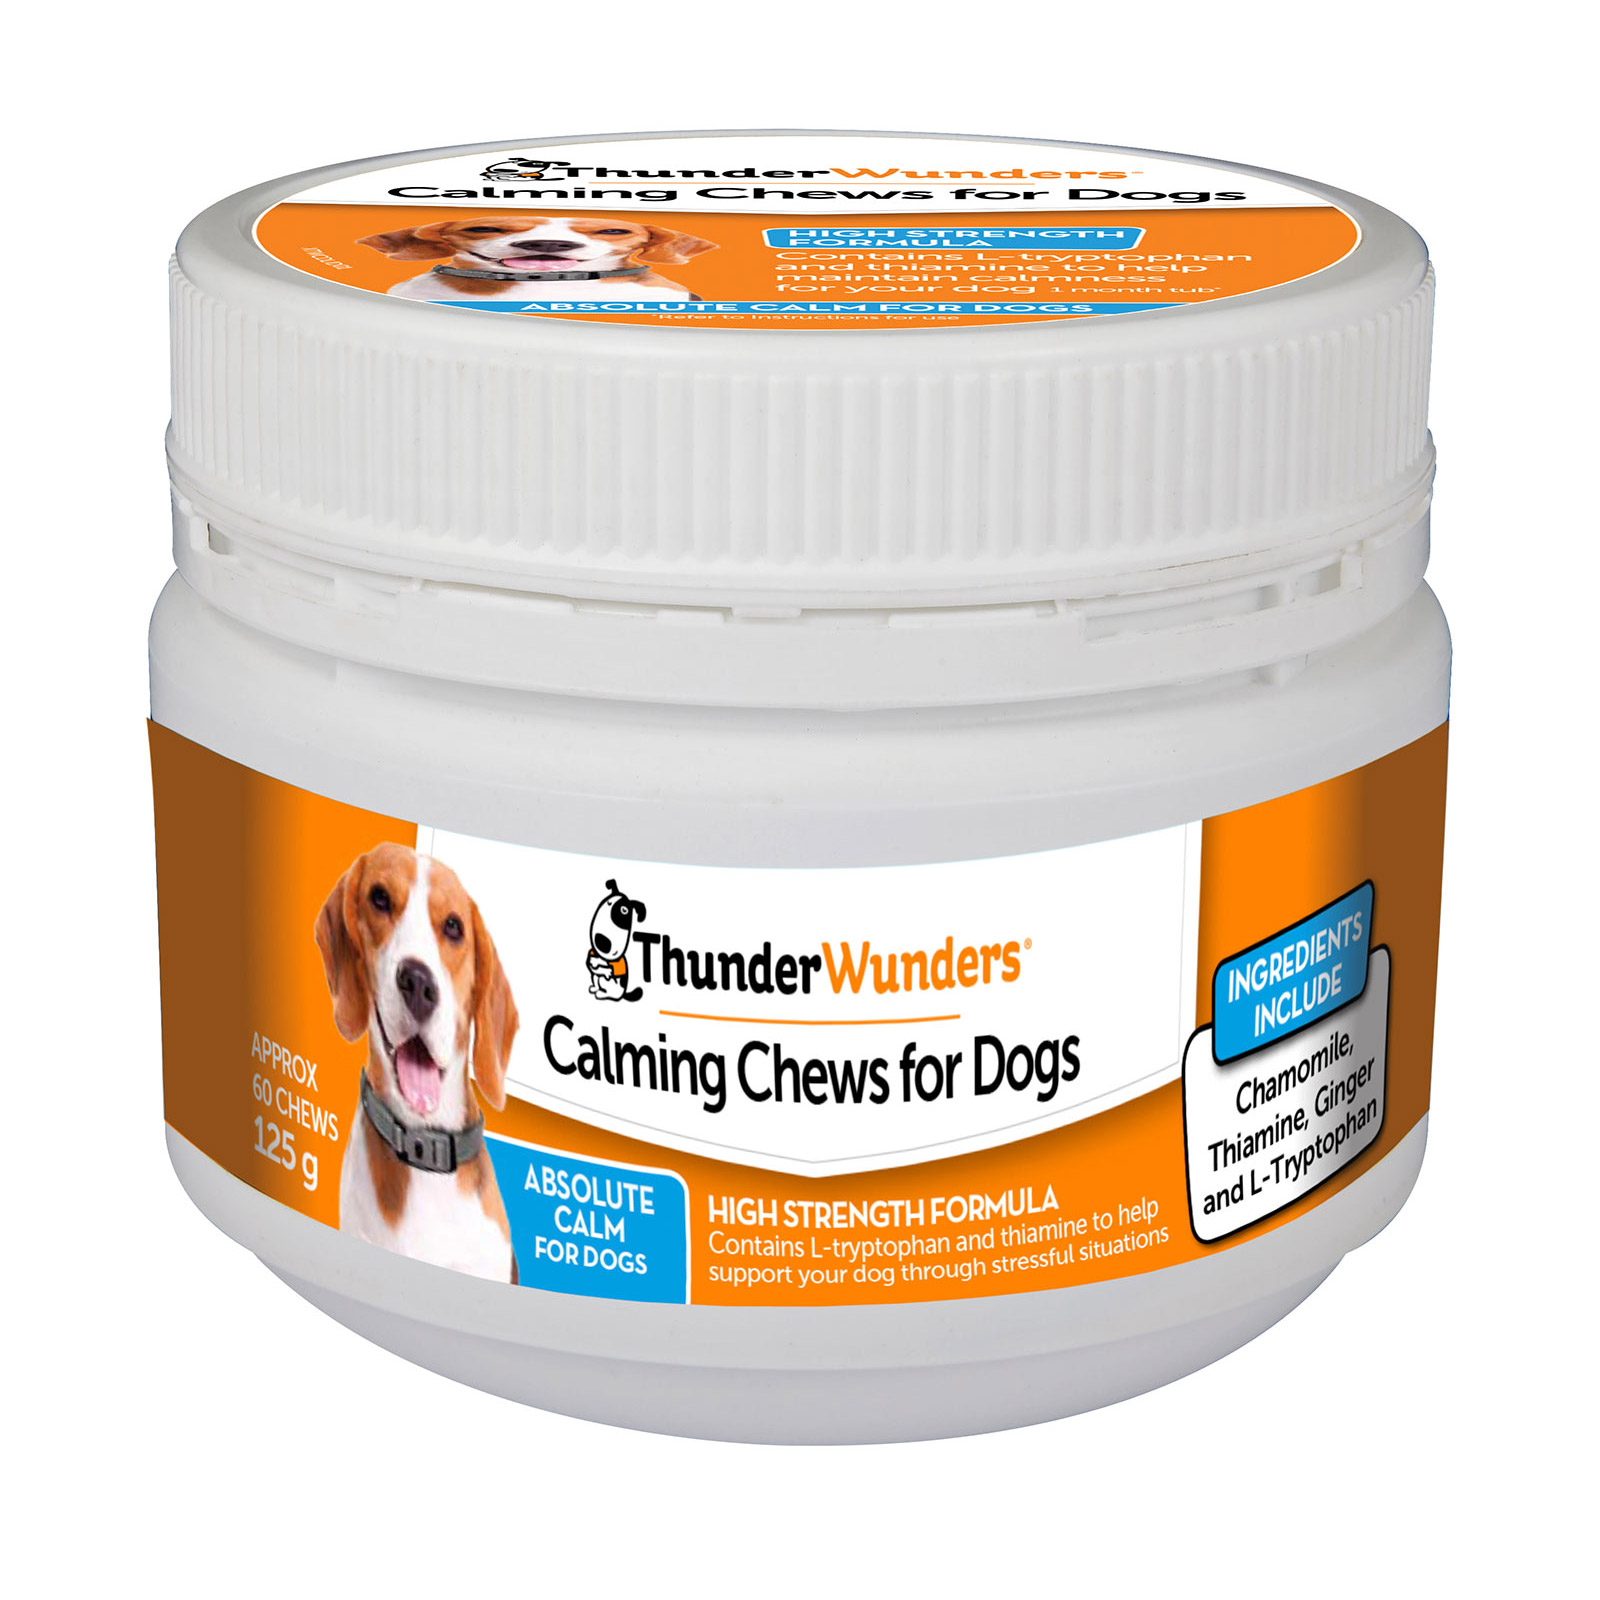 ThunderWunder Calming Chews For Dogs for Dogs